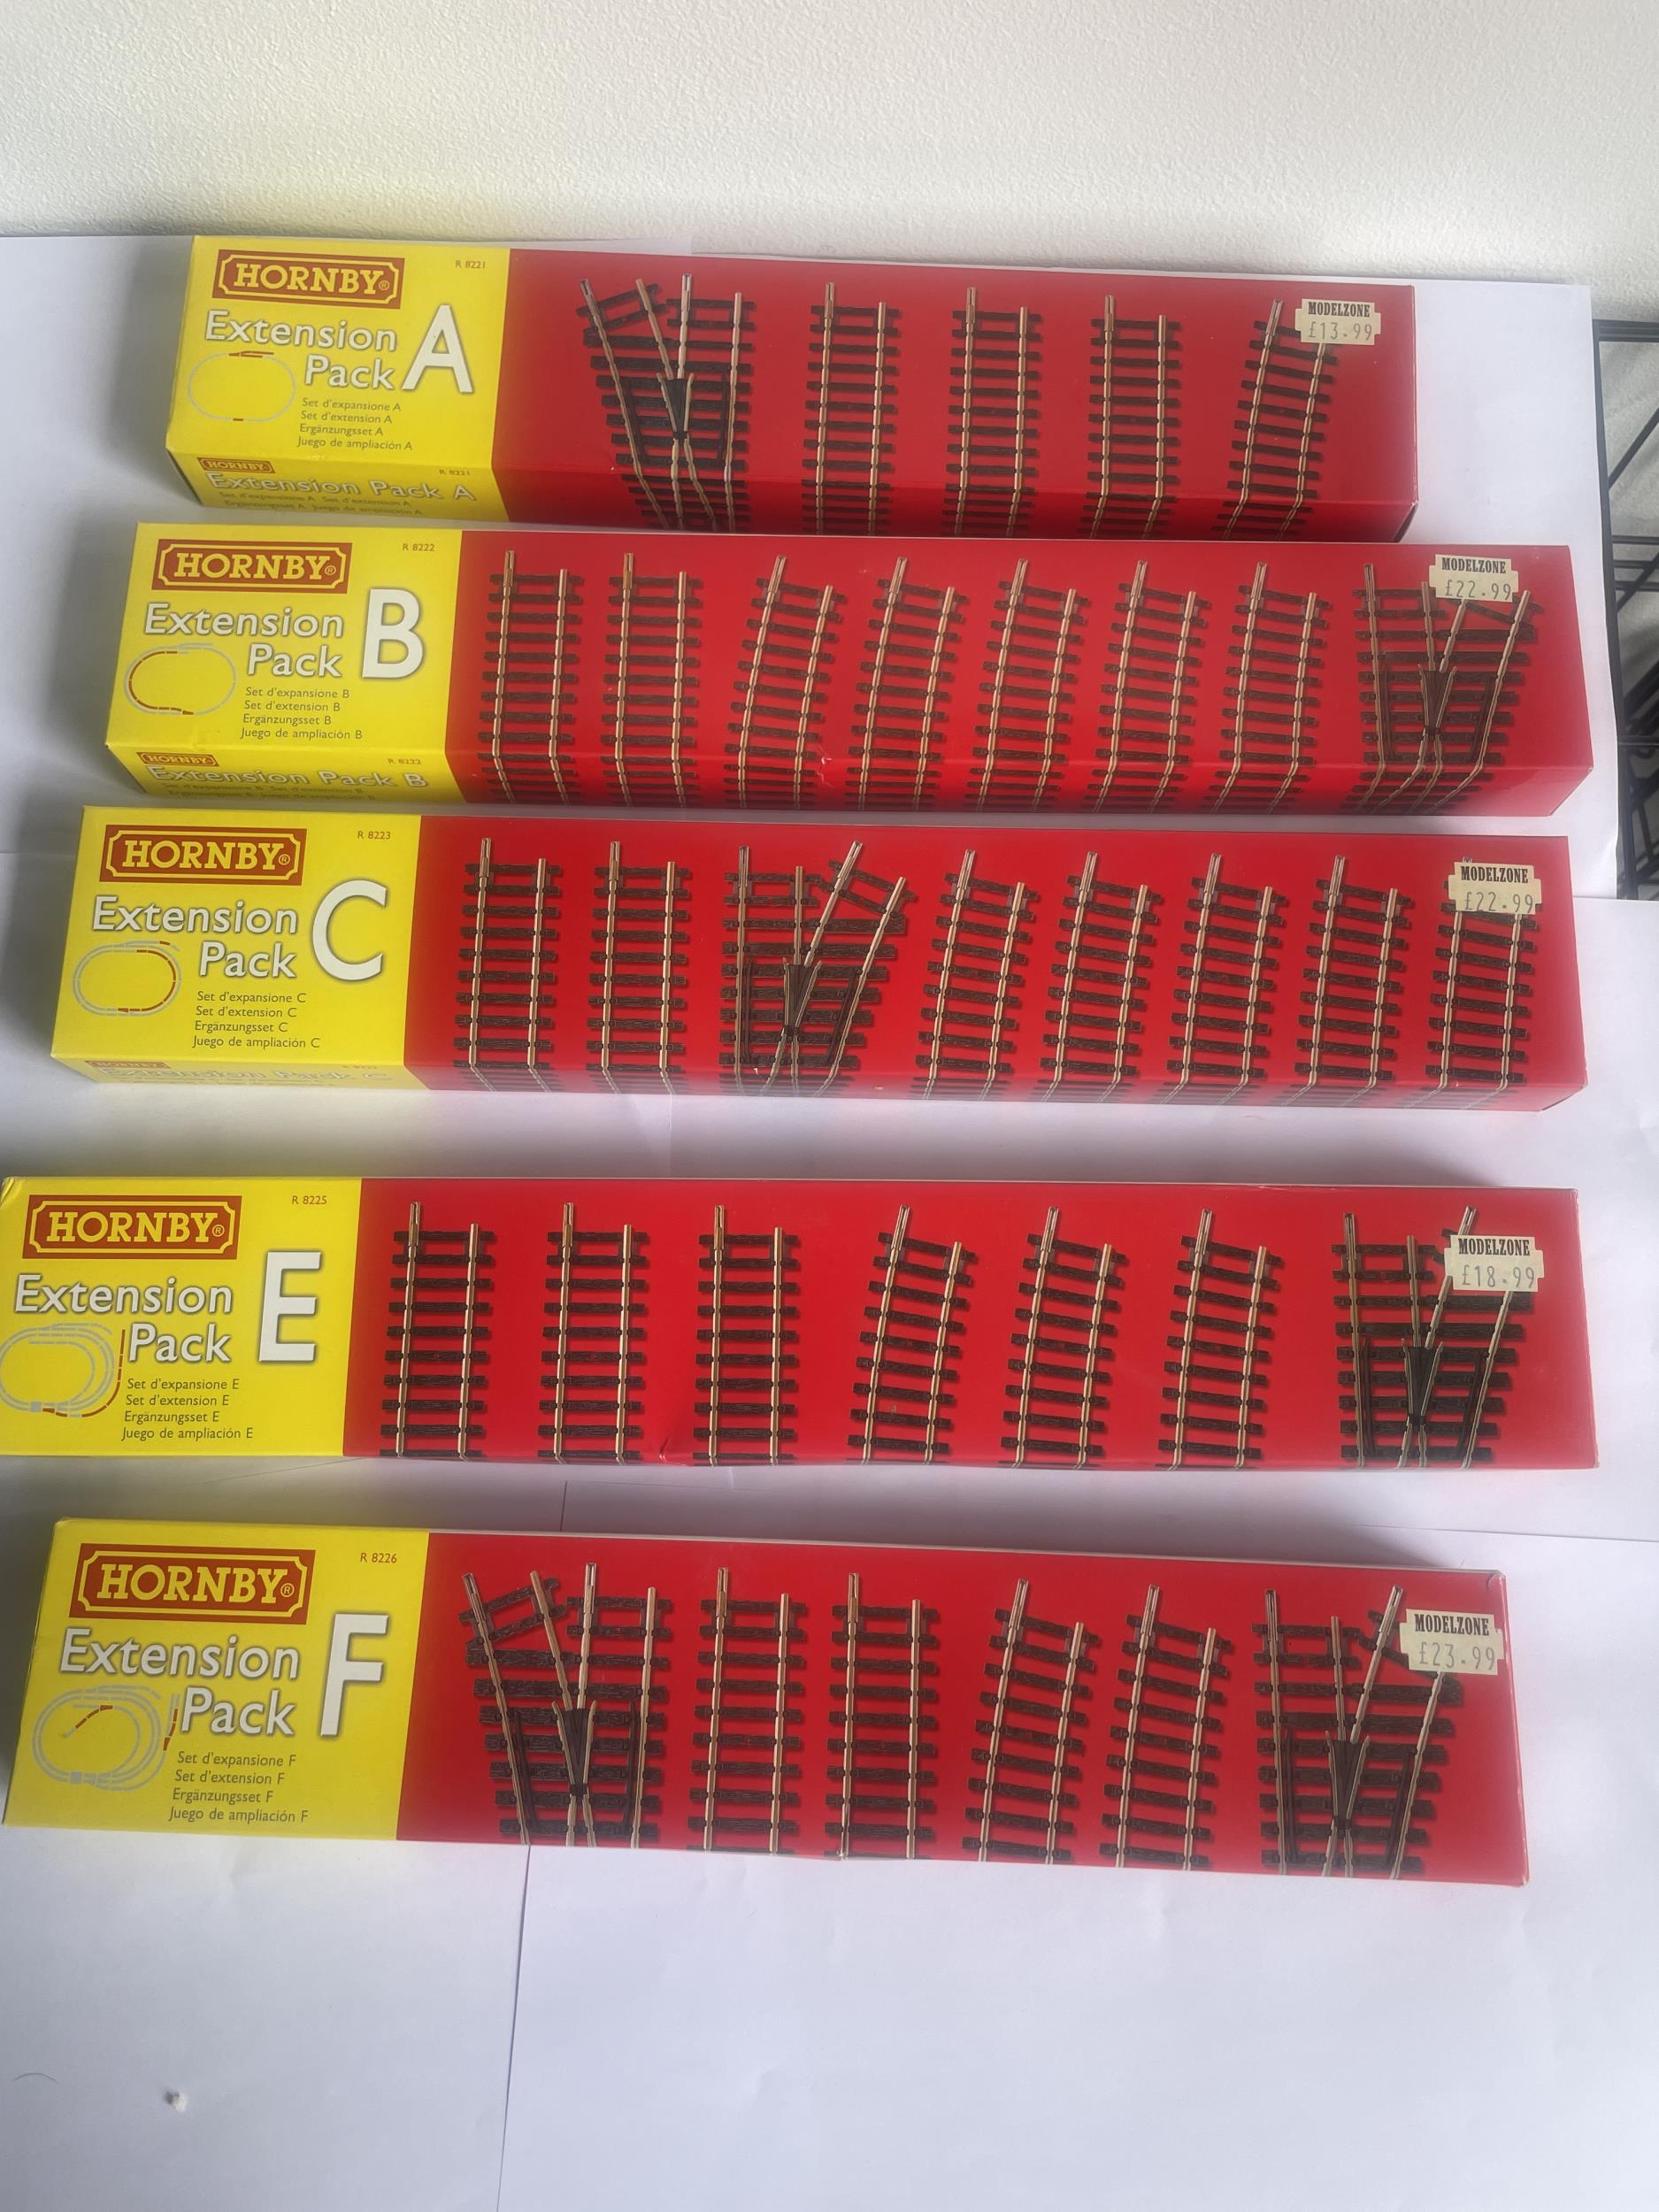 FIVE BOXED HORNBY 00 GAUGE TRACK EXTENSION PACKS TO INCLUDE A,B,C,E AND F